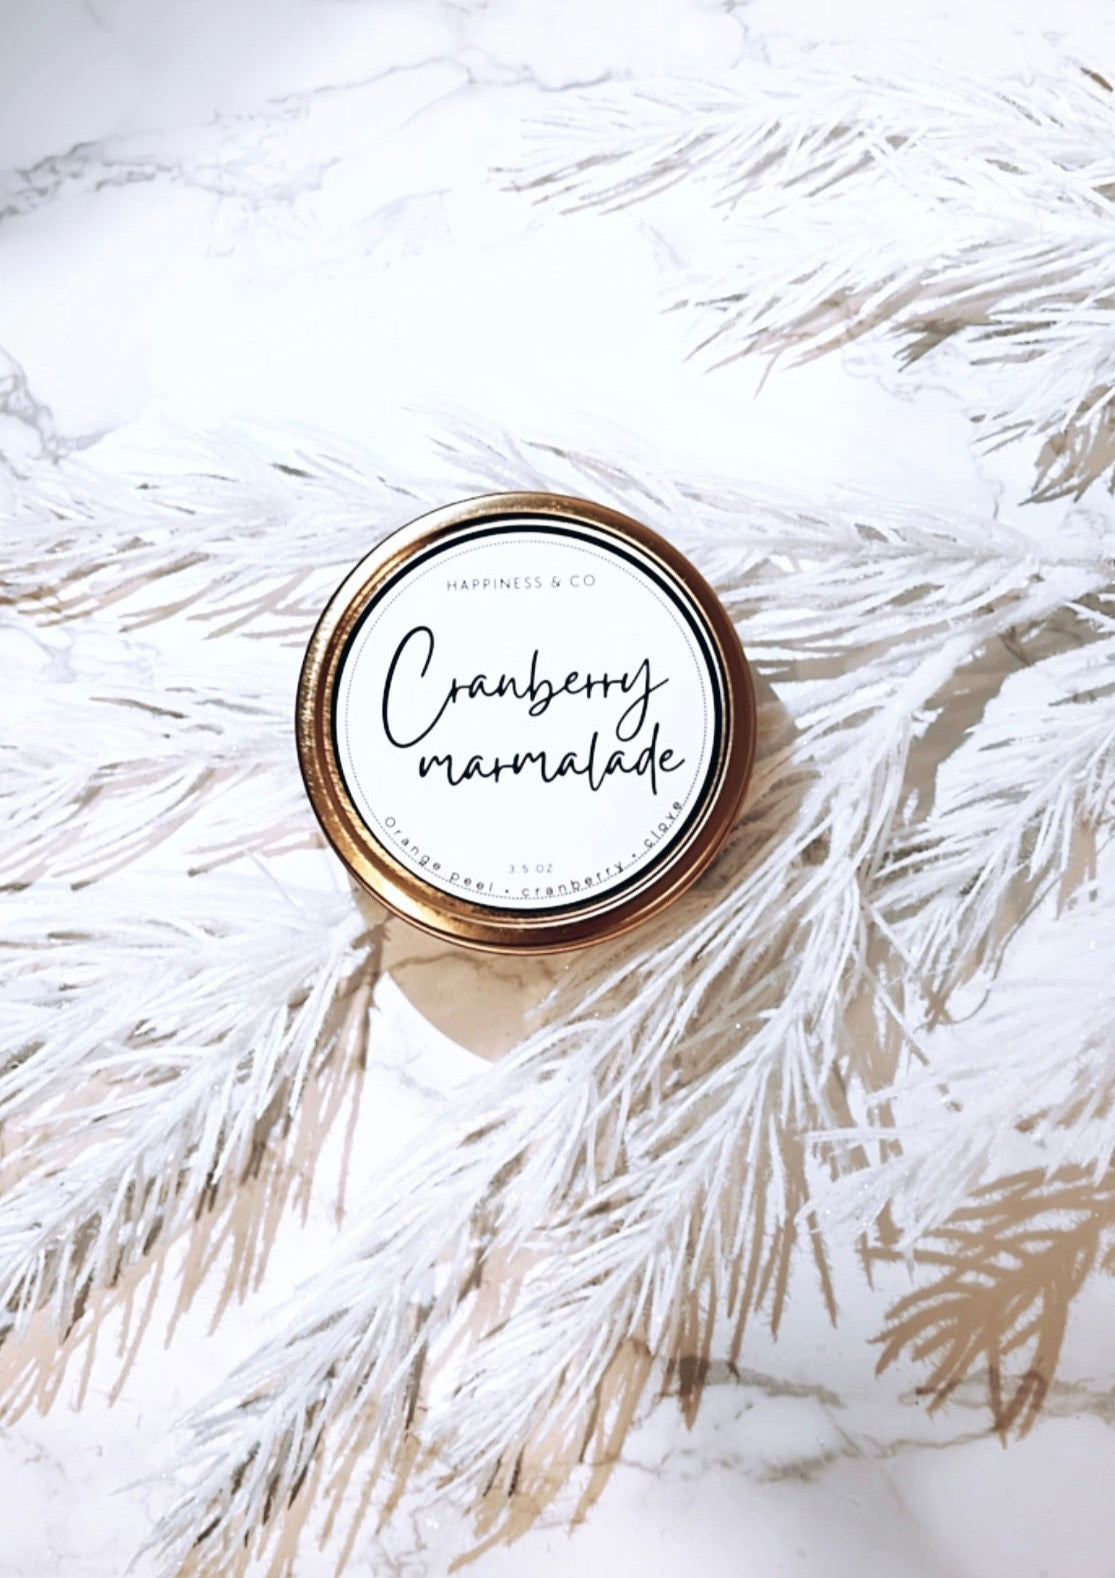 TRAVEL CANDLE - Cranberry Marmalade